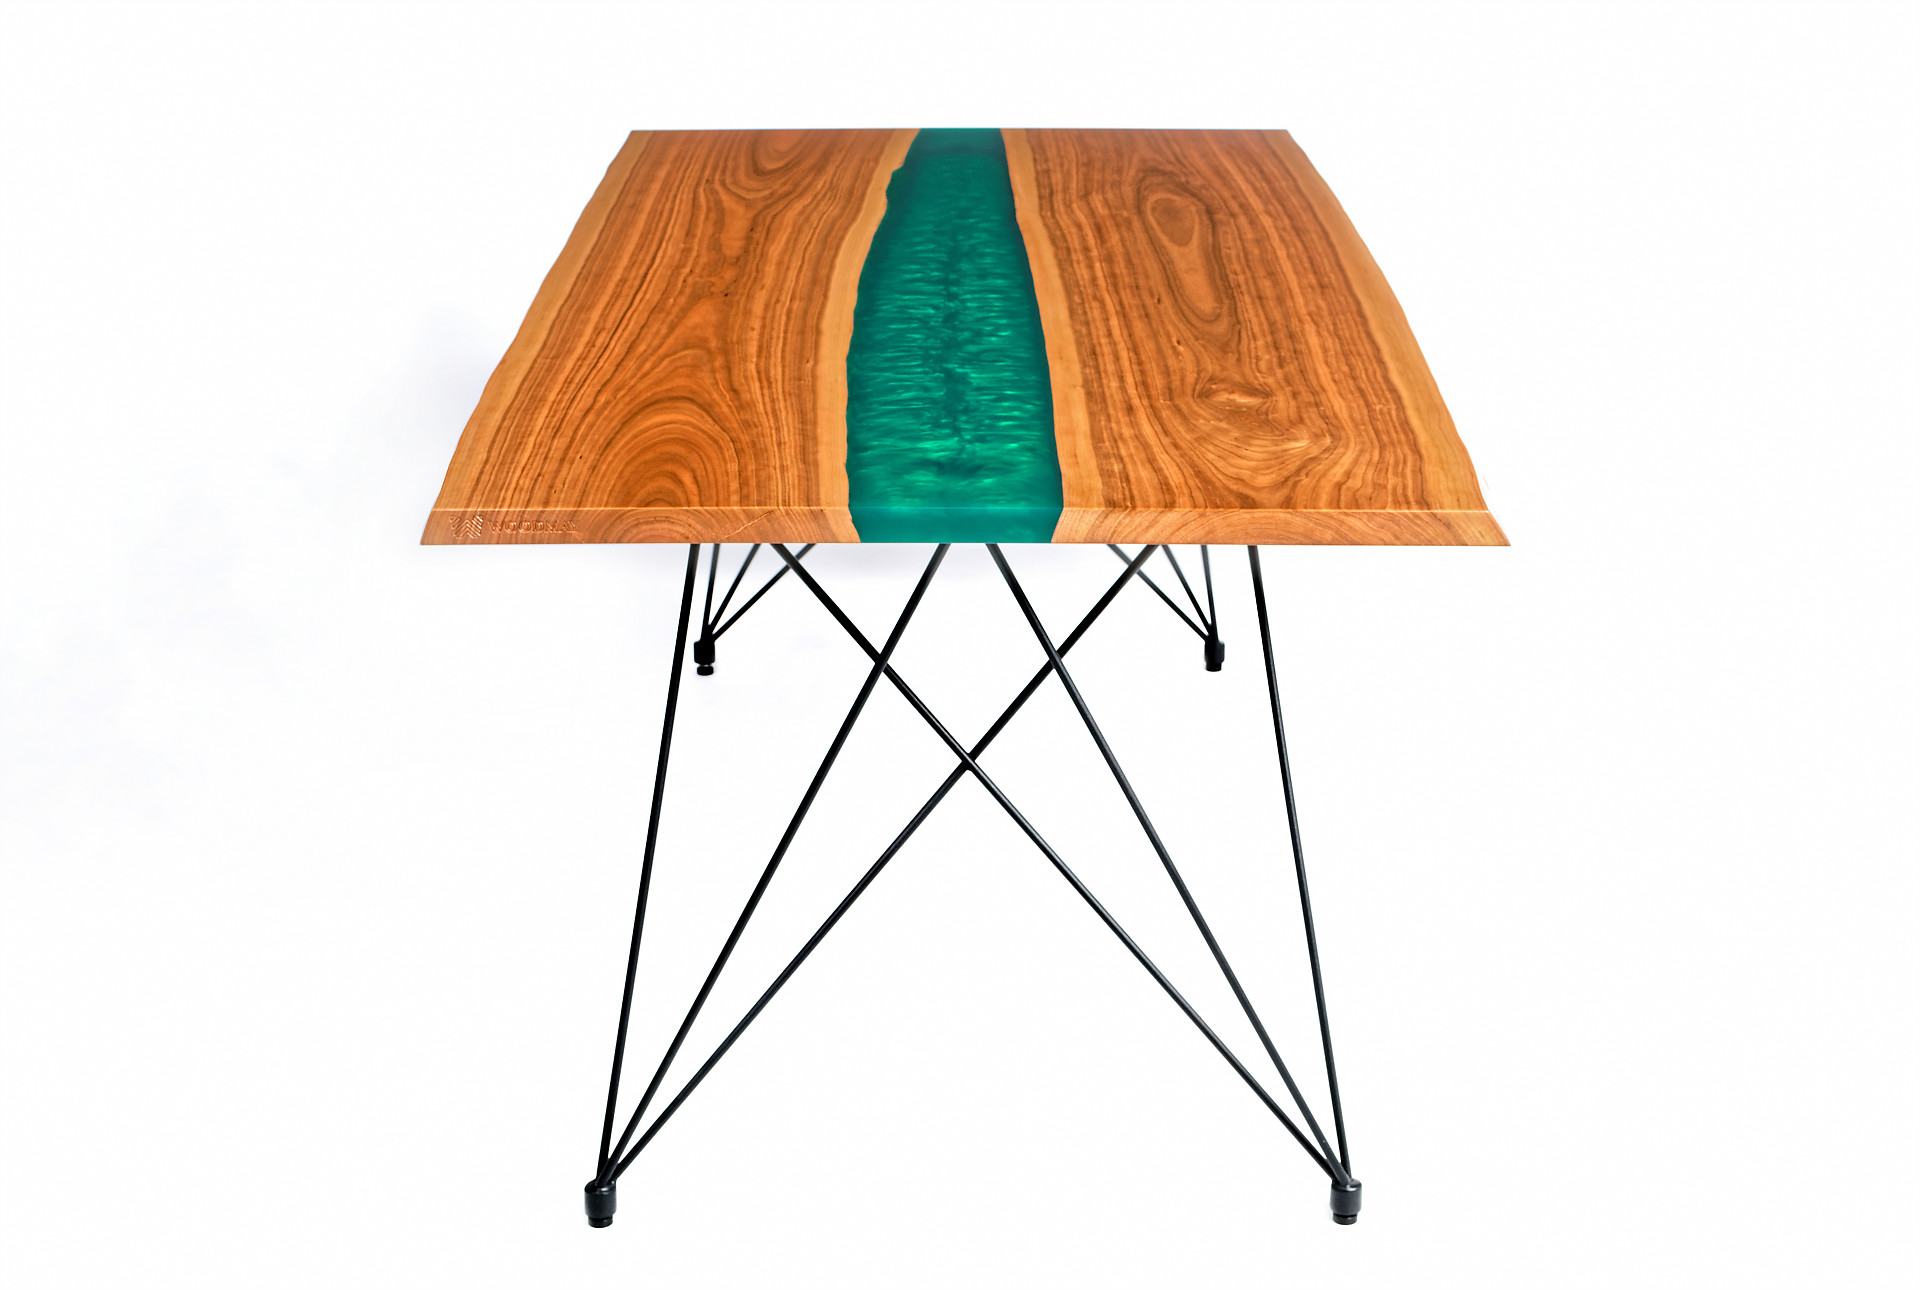 Maia – cherry tree table with green epoxy resin